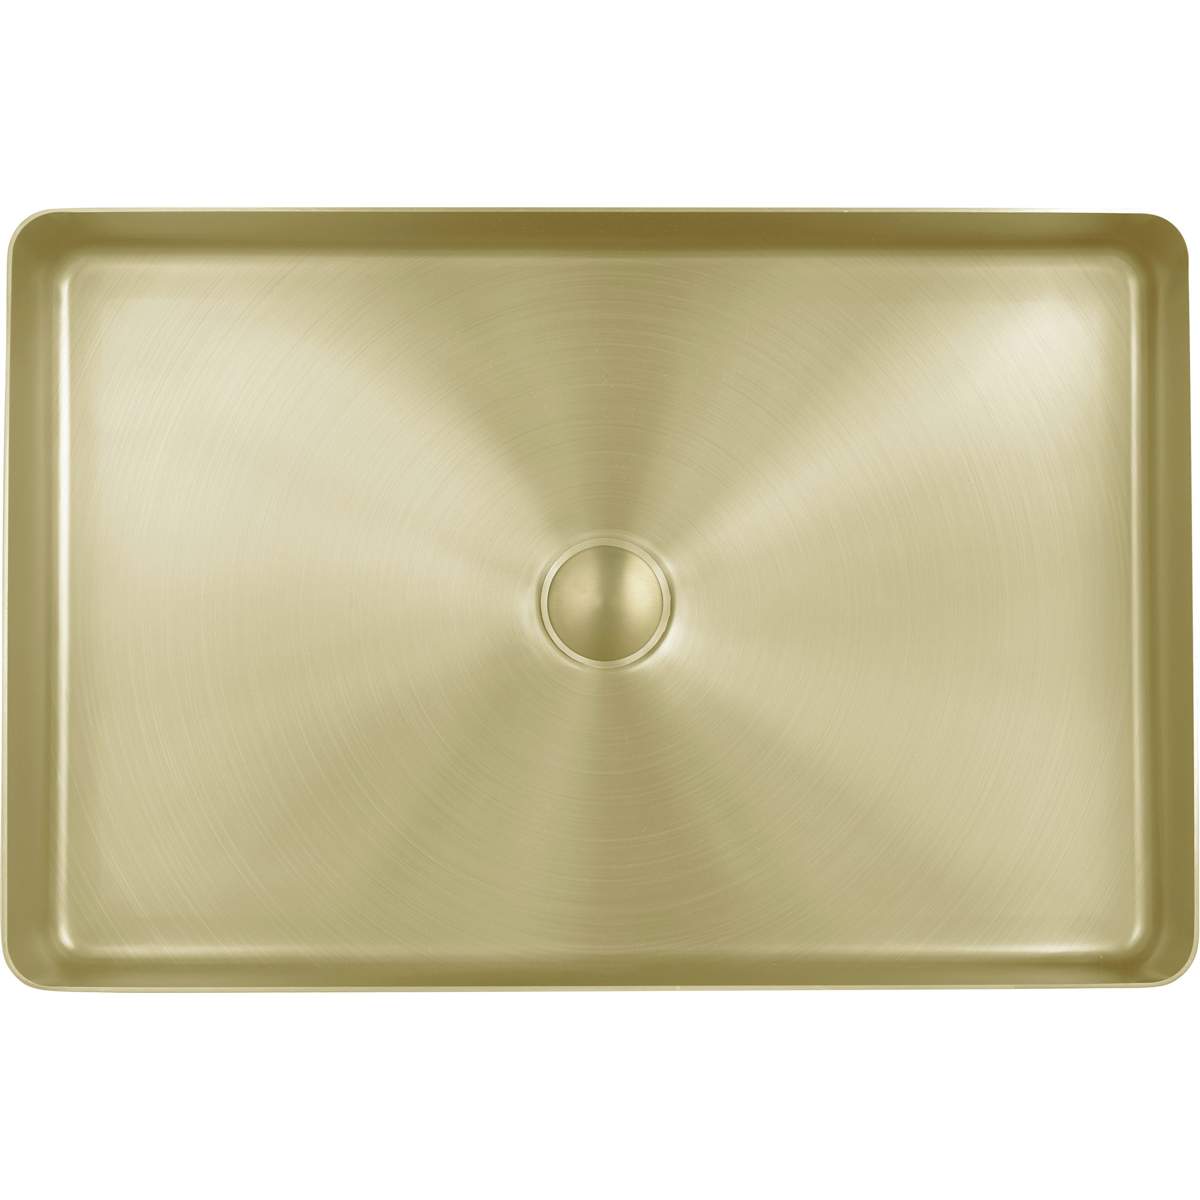 JTP Vos Brushed Brass Grade 316 Stainless Steel Counter Top Basin (23CTS520BBR)